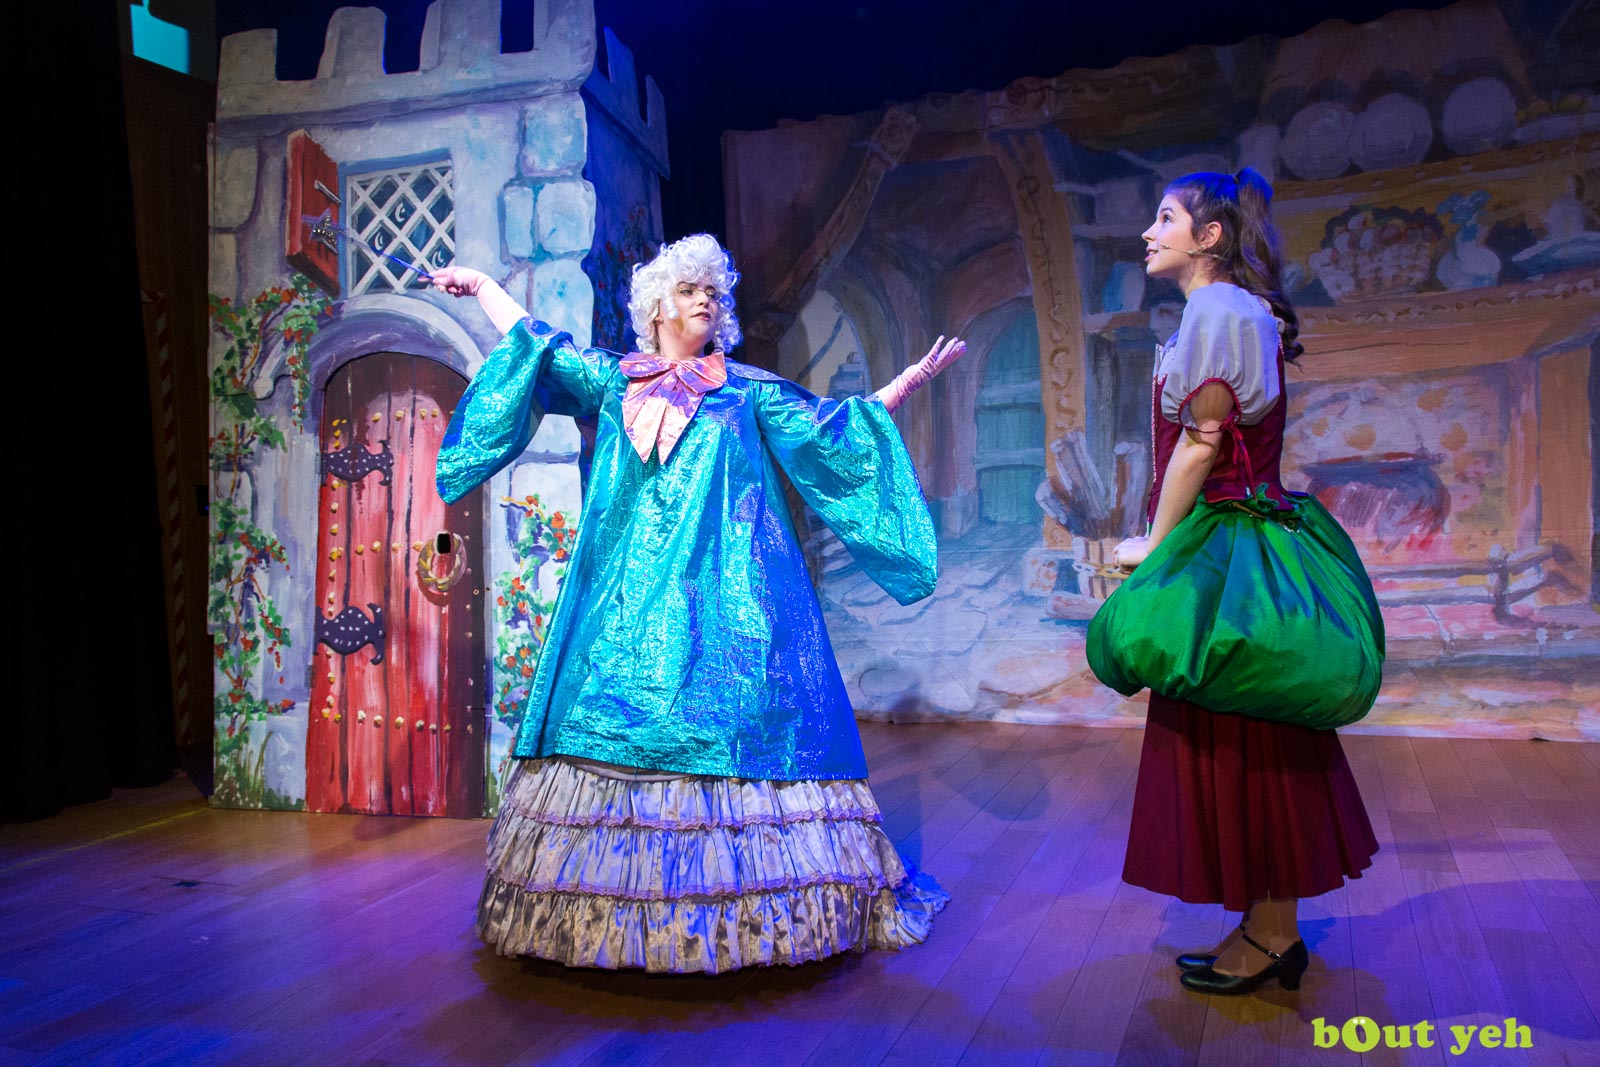 PR photographers Belfast portfolio photo 9934 of Cinderella pantomime at the Old Courthouse Theatre Antrim - Bout Yeh photography and video production services Belfast, Northern Ireland